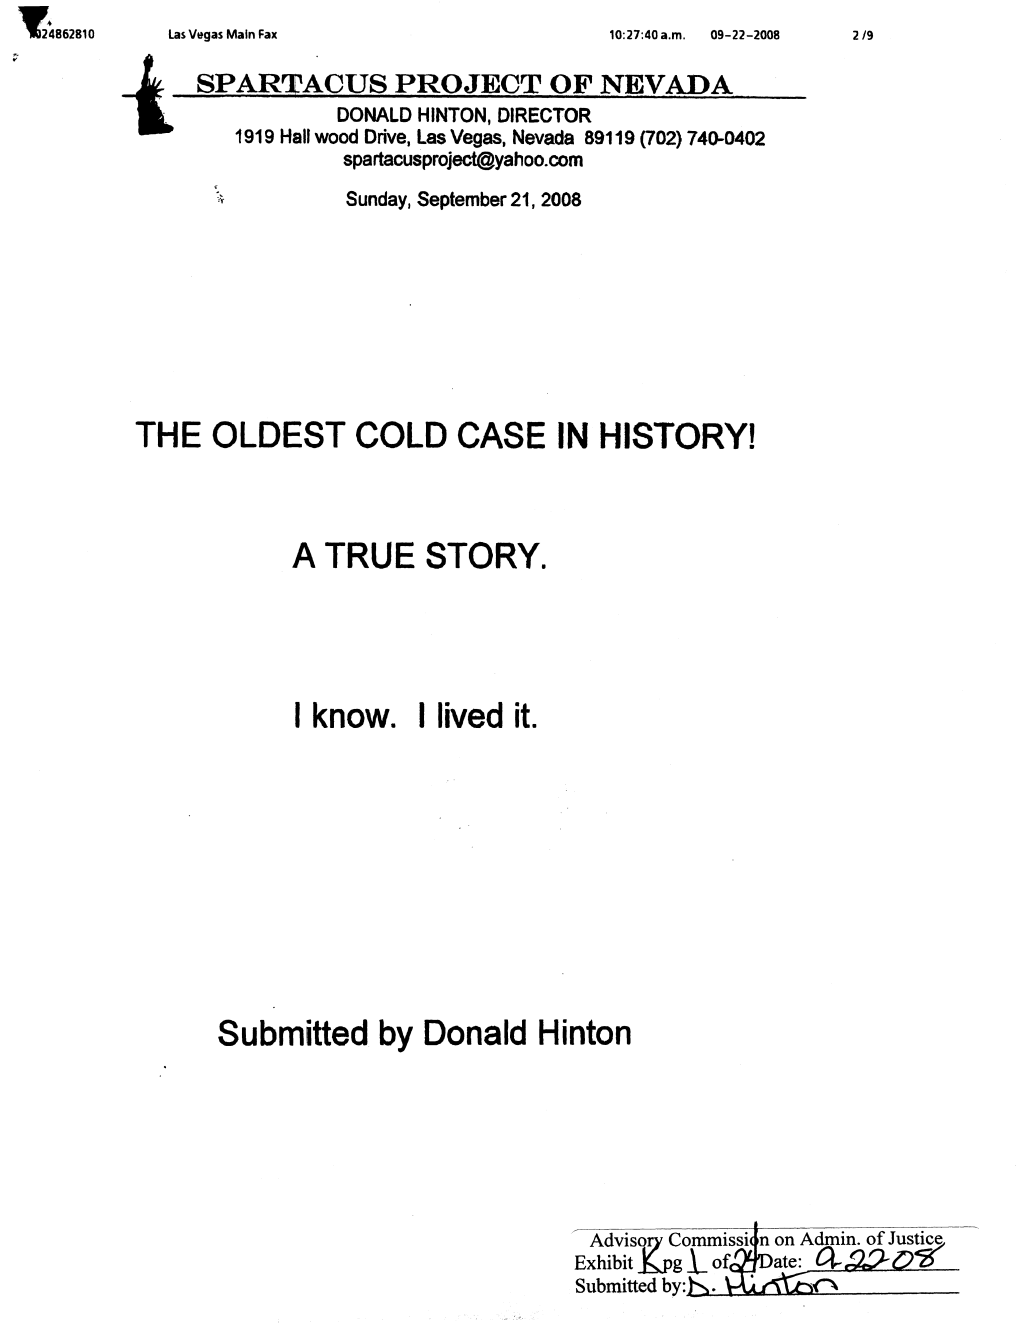 THE OLDEST COLD CASE in HISTORY! a TRUE STORY. 1 Know. I Lived It. Submitted by Donald Hinton